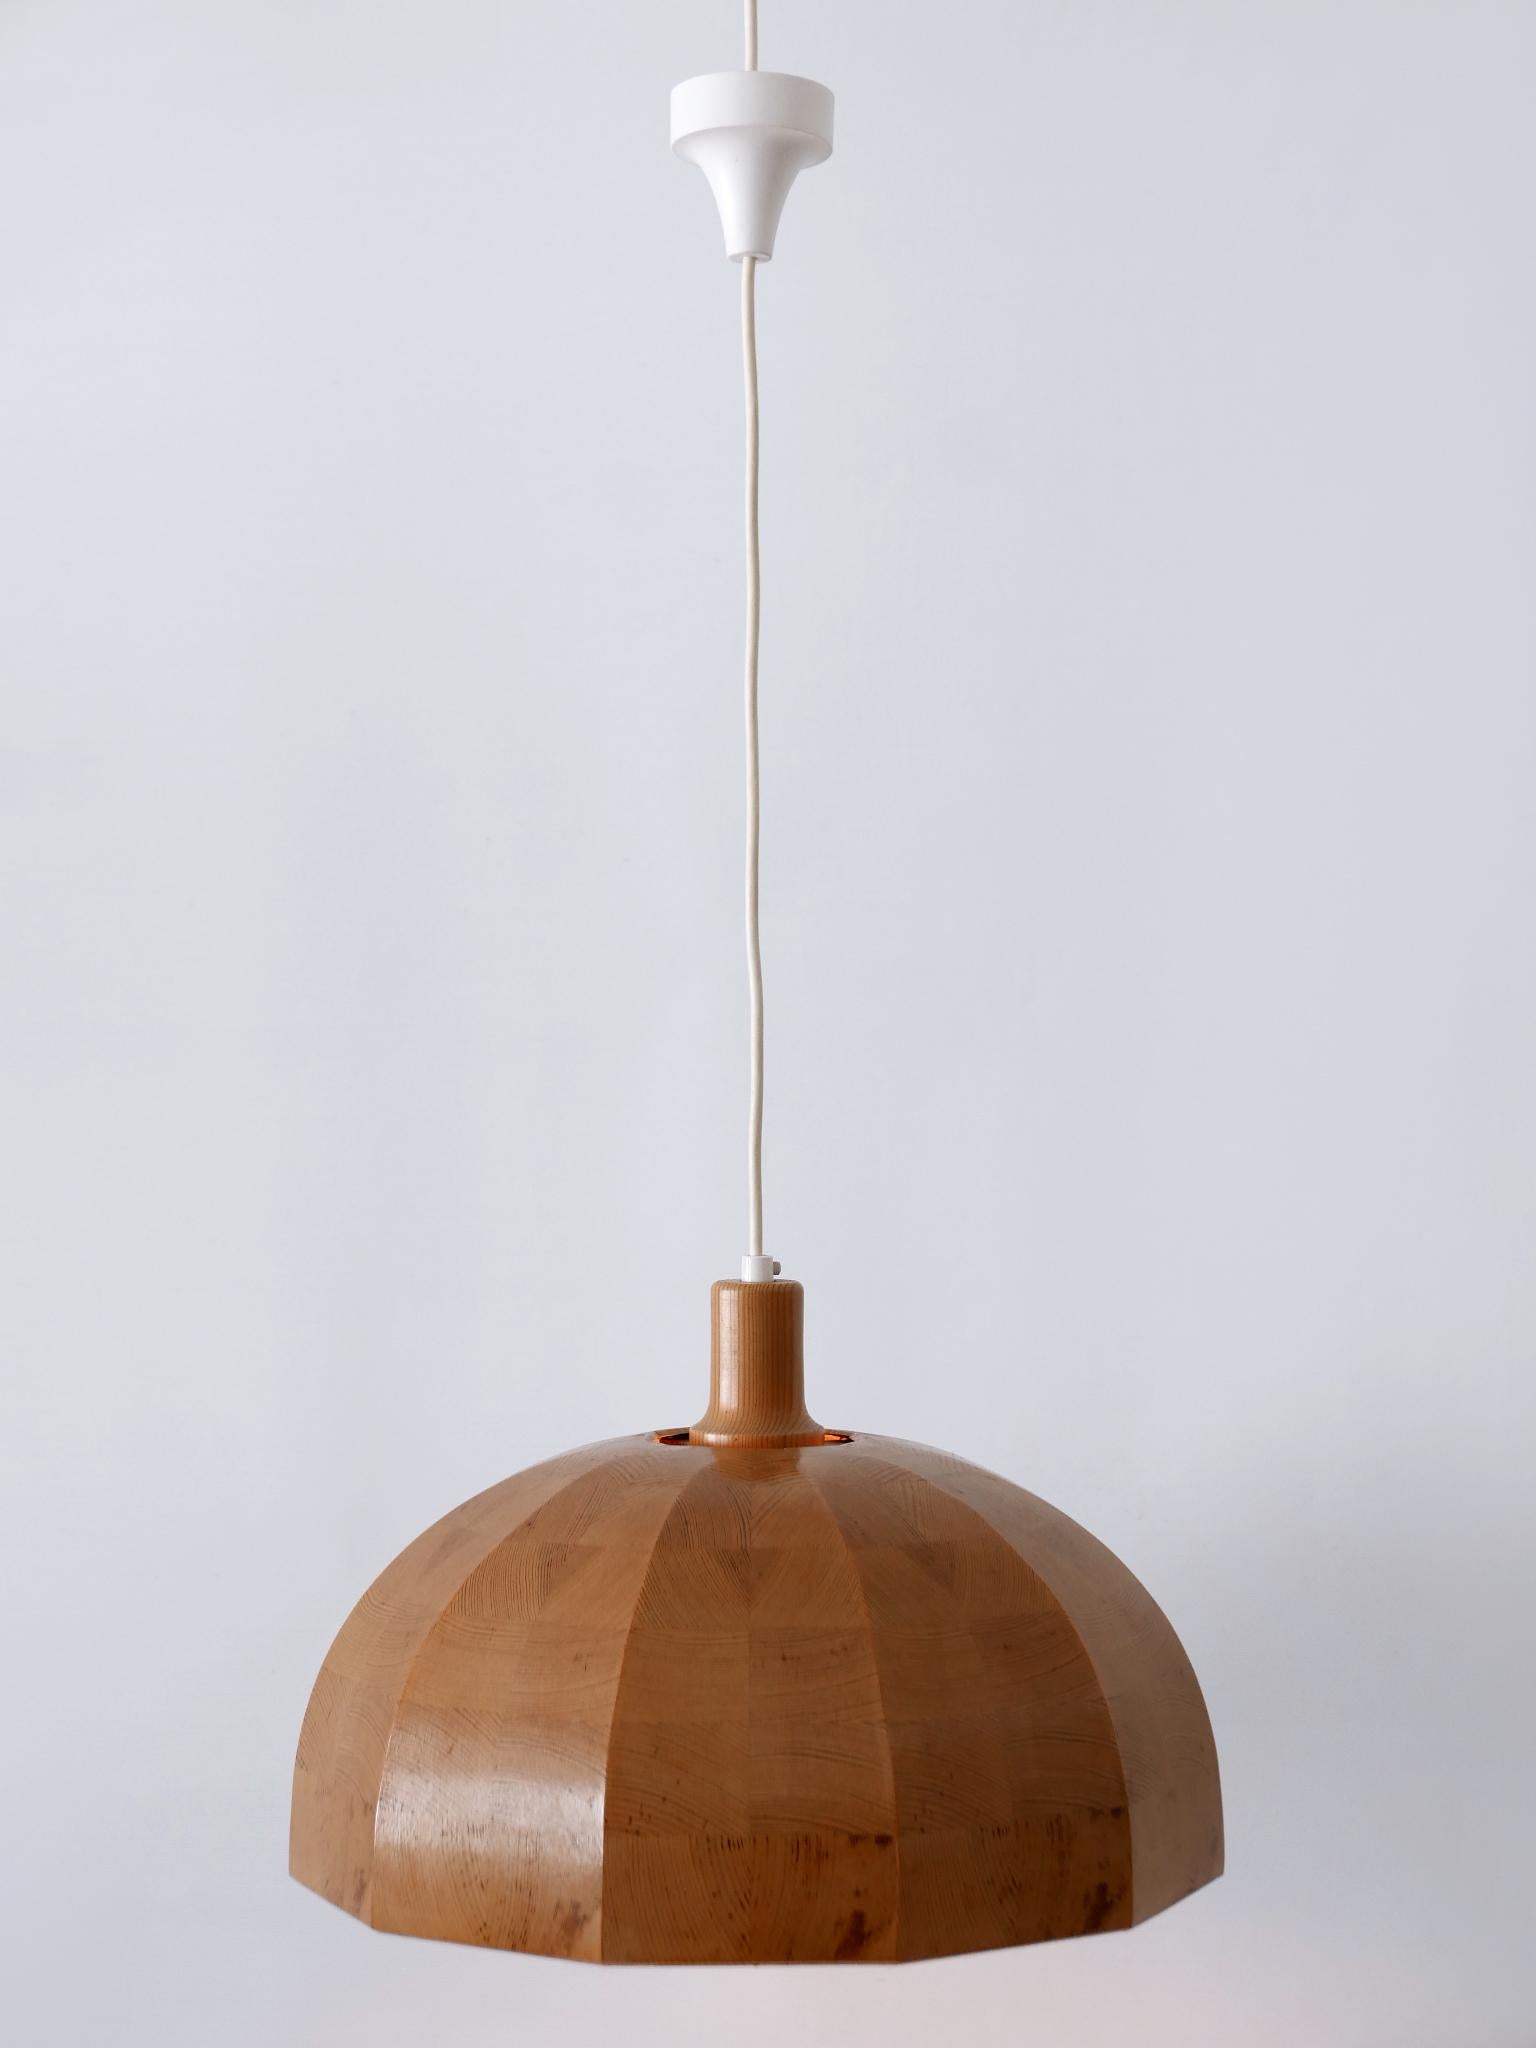 Rare Mid-Century Modern Pine Wood Pendant Lamp or Hanging Light Sweden, 1960s In Good Condition For Sale In Munich, DE